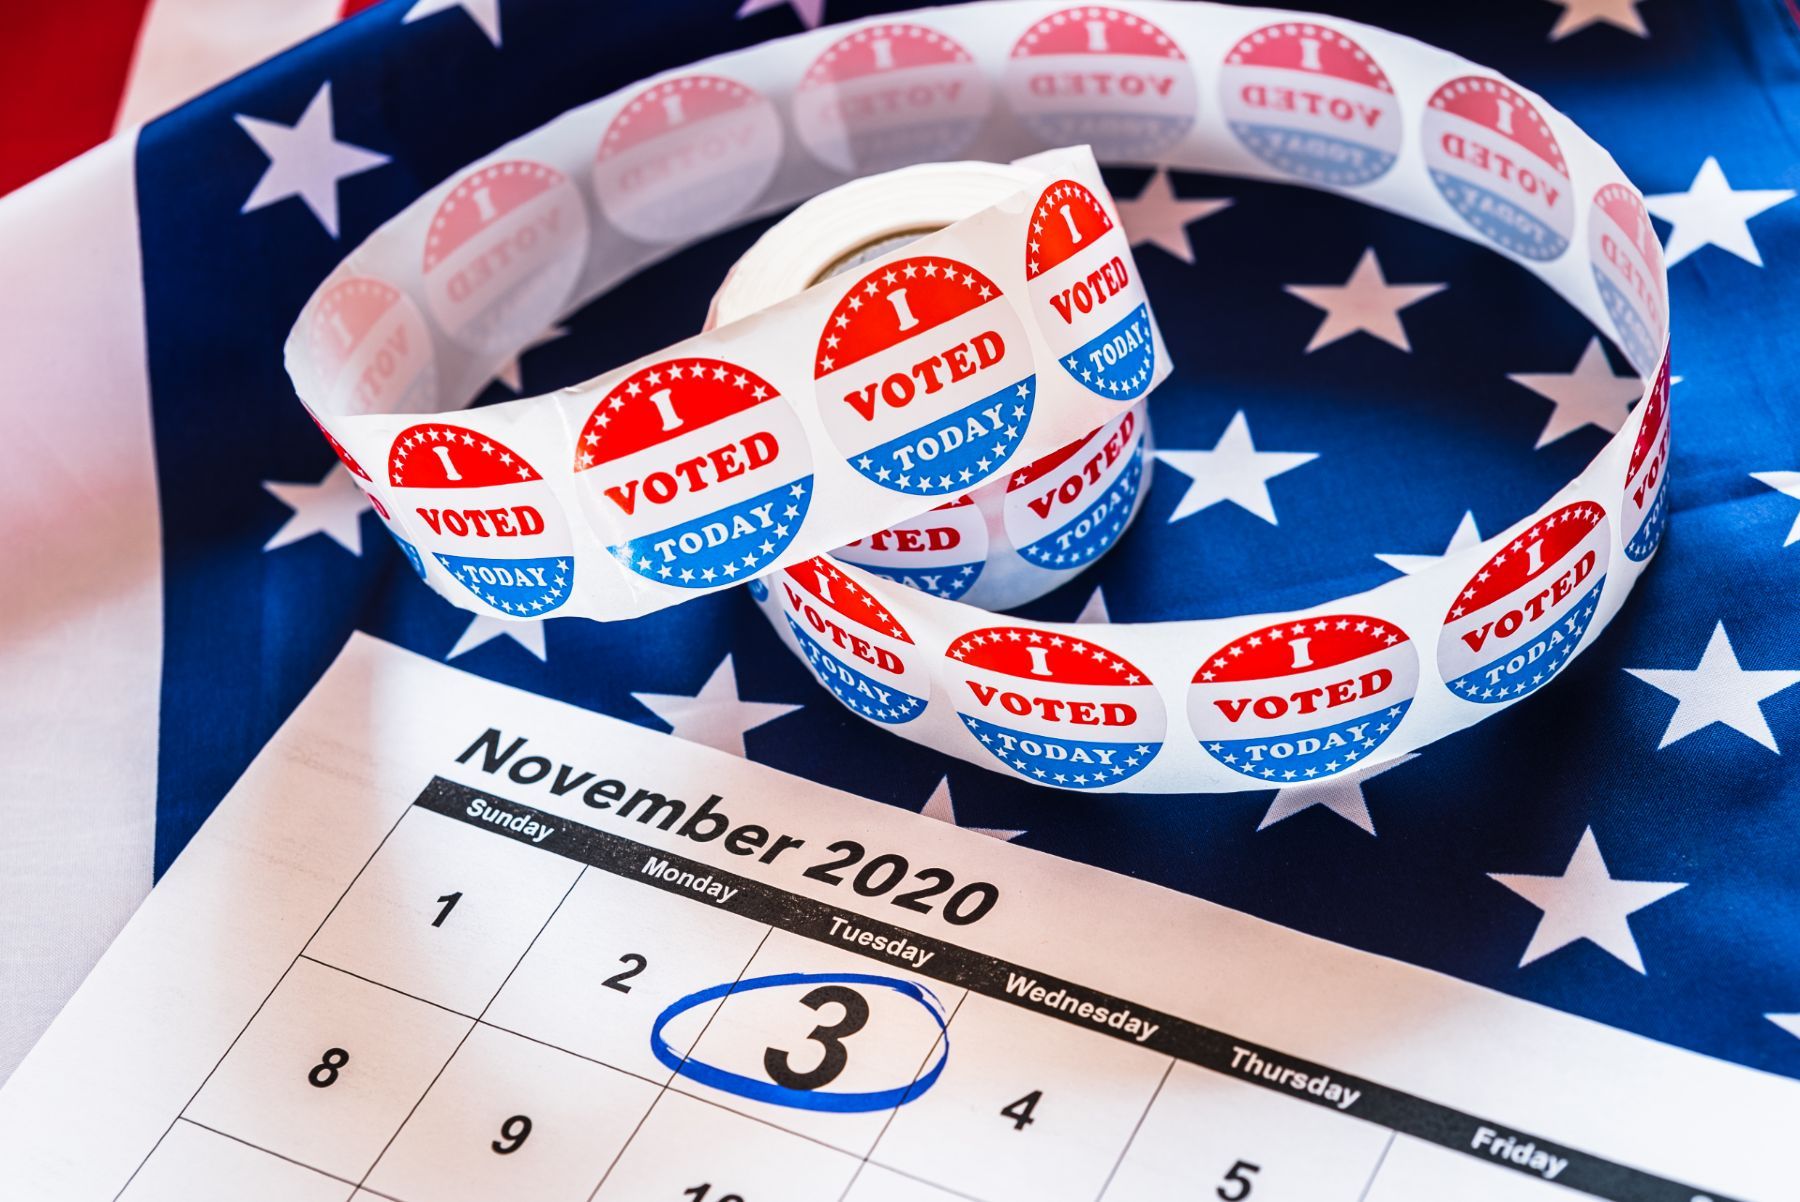 A calendar shows Nov. 3 circled in blue, lies next to "I voted today" stickers and a U.S. flag - early voting